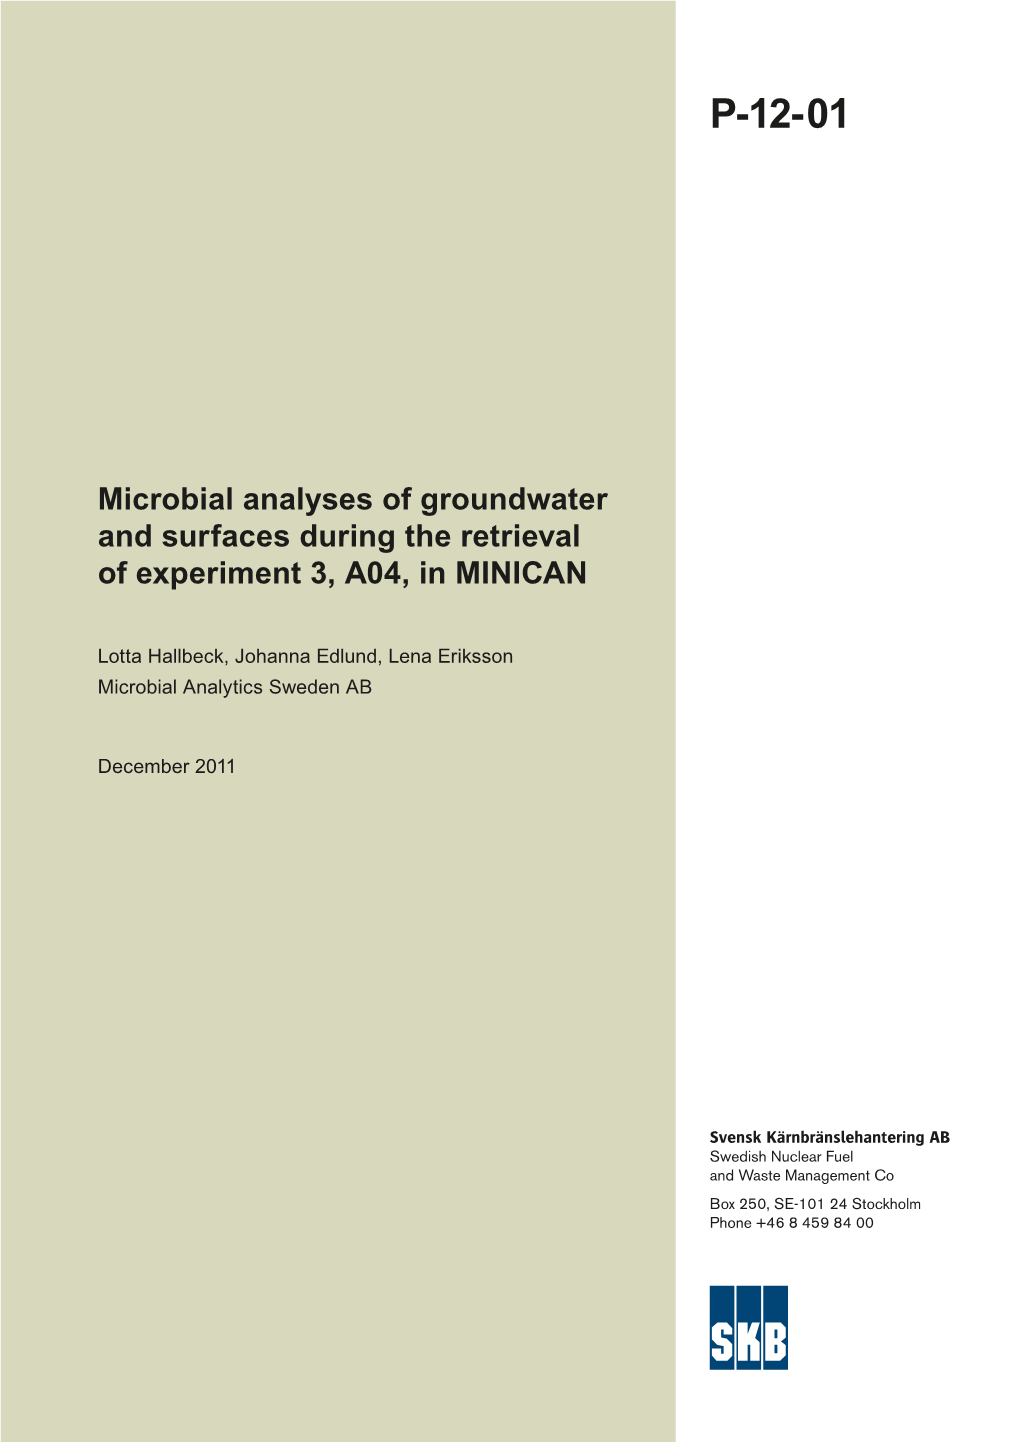 Microbial Analyses of Groundwater and Surfaces During the Retrieval of Experiment 3, A04, in MINICAN